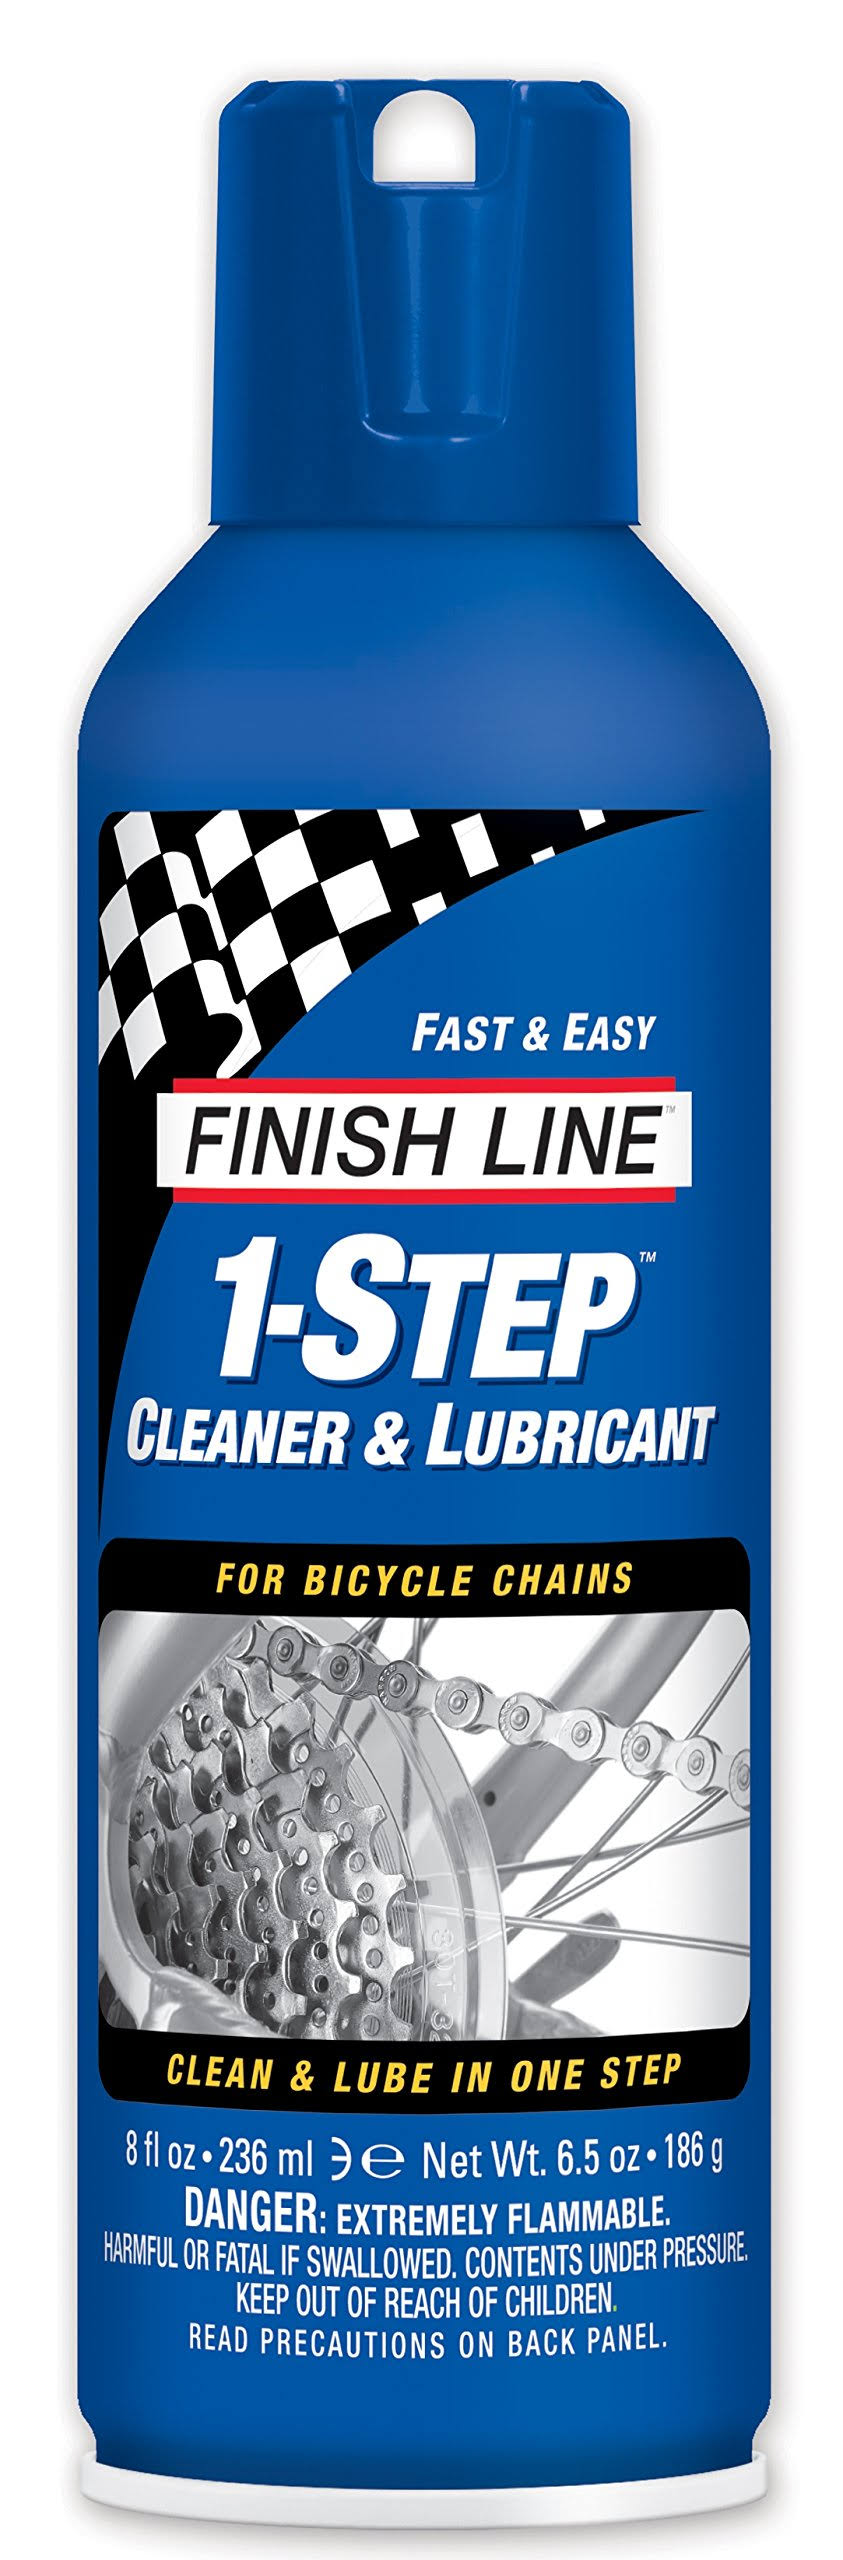 Finish Line 1-Step Bicycle Chain Cleaner & Lubricant - 120ml